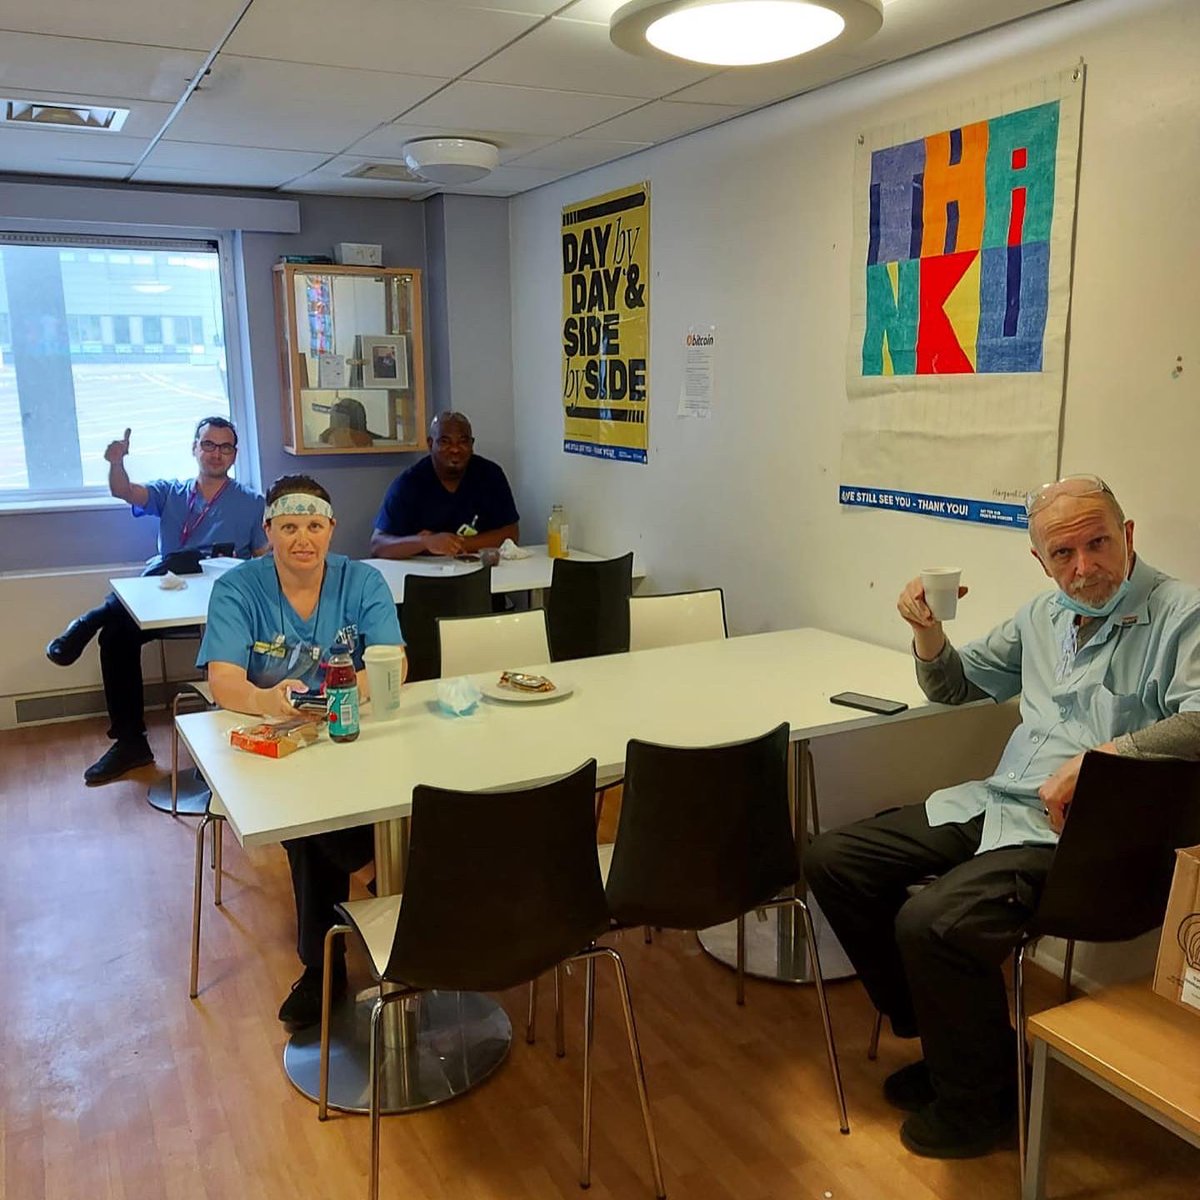 The team over at  Leeds General Infirmary brightening up their staff room with #posterforthepeople. 

We honestly couldn’t have hoped for a better place to see these banner pop up. 

Thank you JMA Photography for helping to organise this!